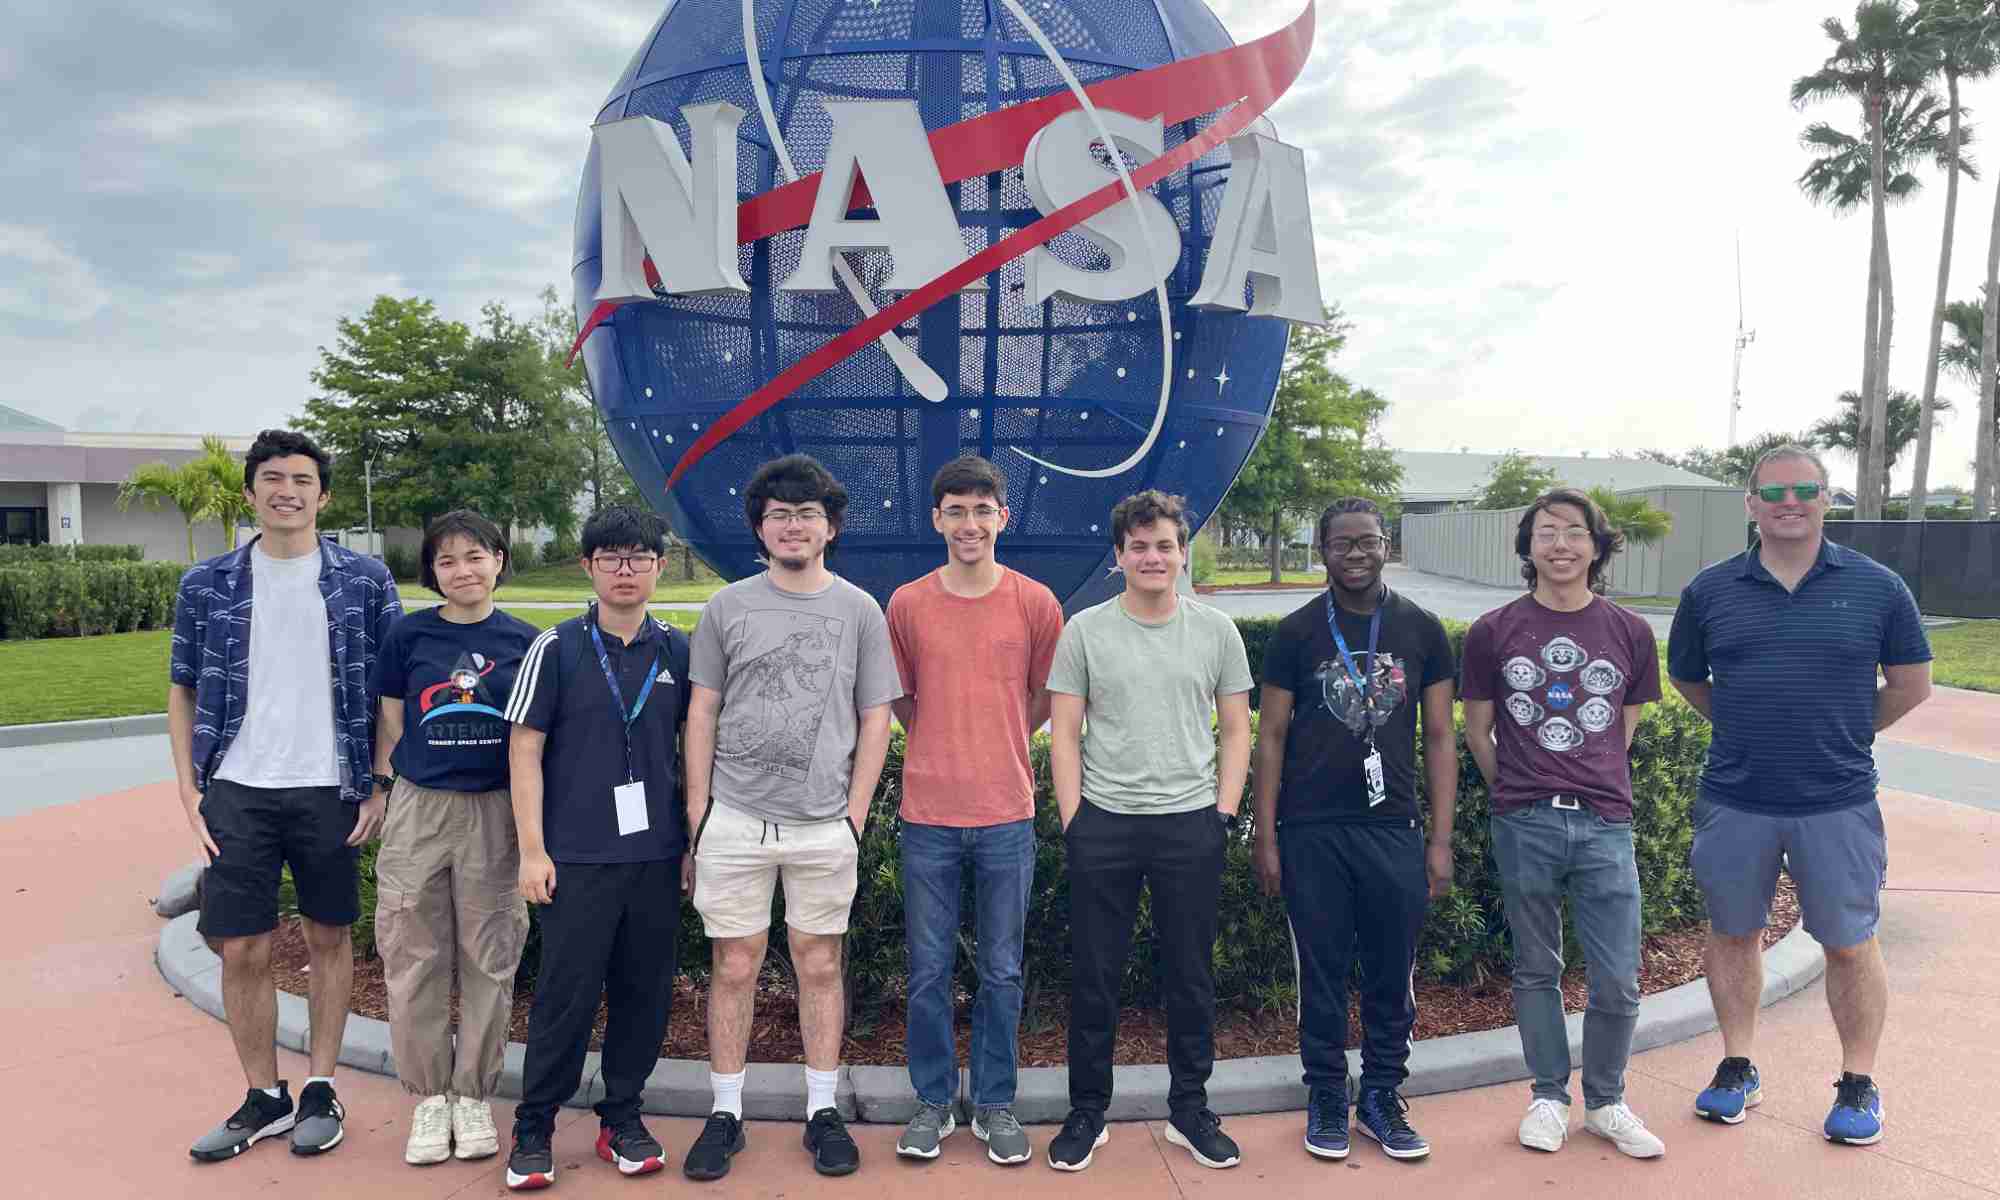 University of Rochester undergraduate engineering students and their advisor pose for a photo in front of the iconic NASA sphere.